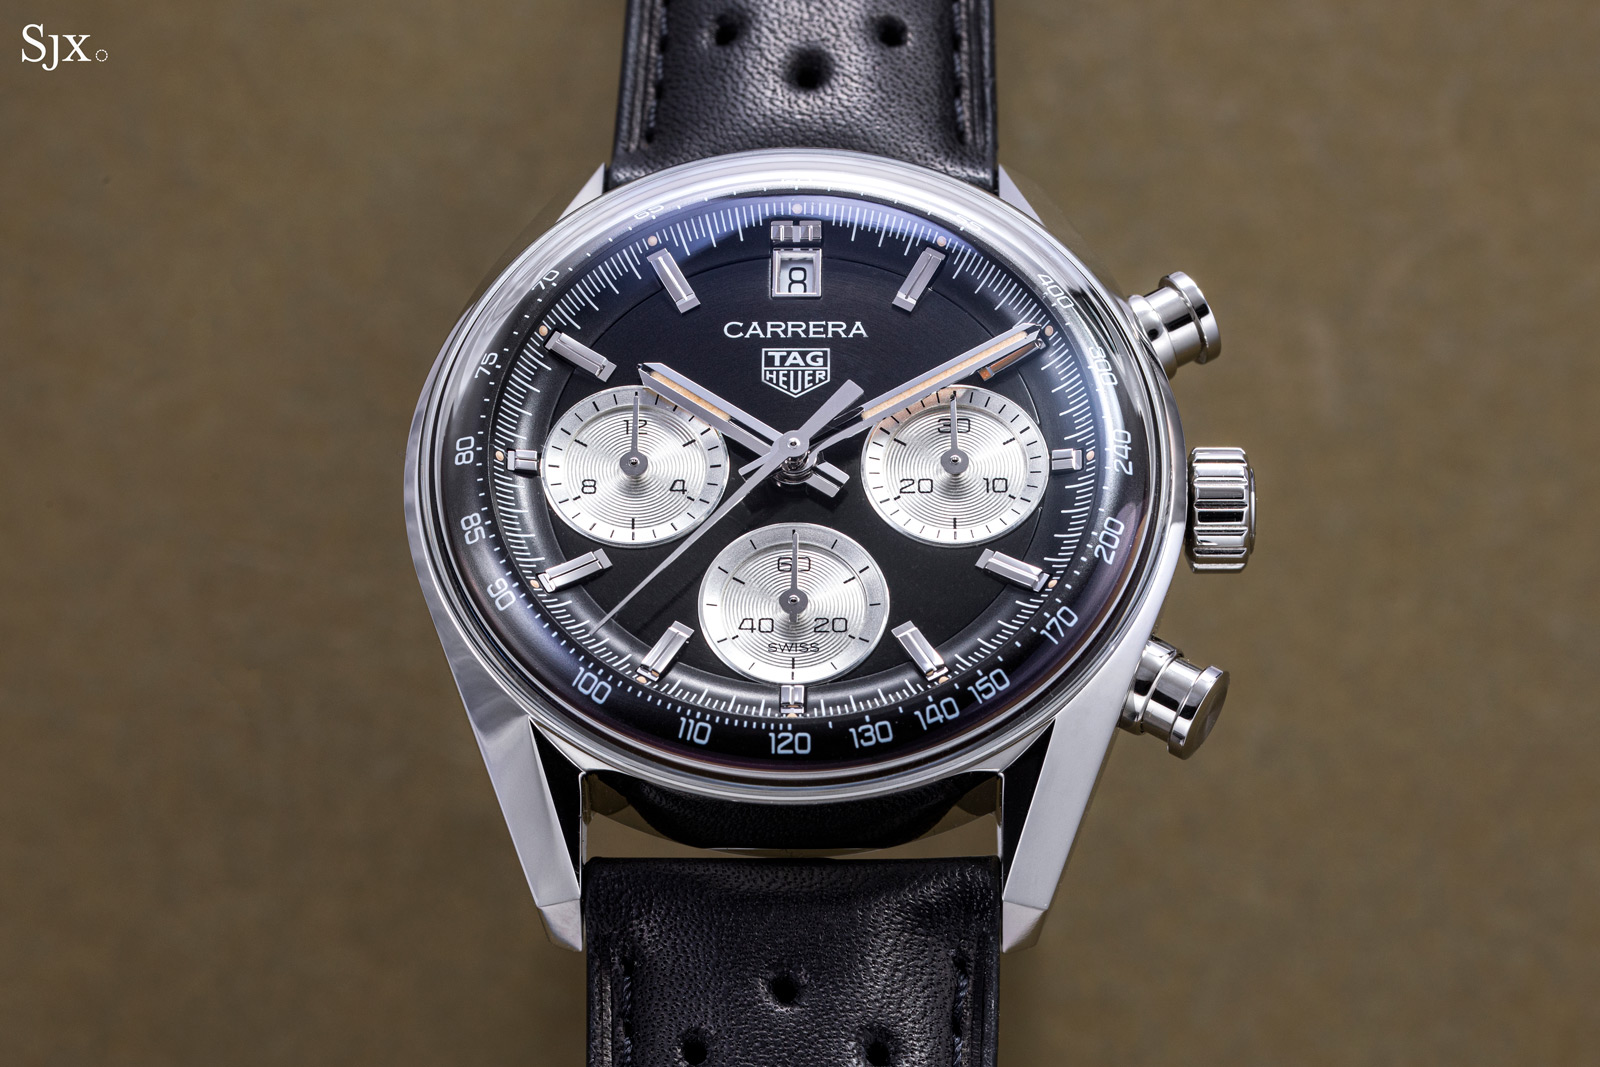 Raising a glass to the TAG Heuer Carrera